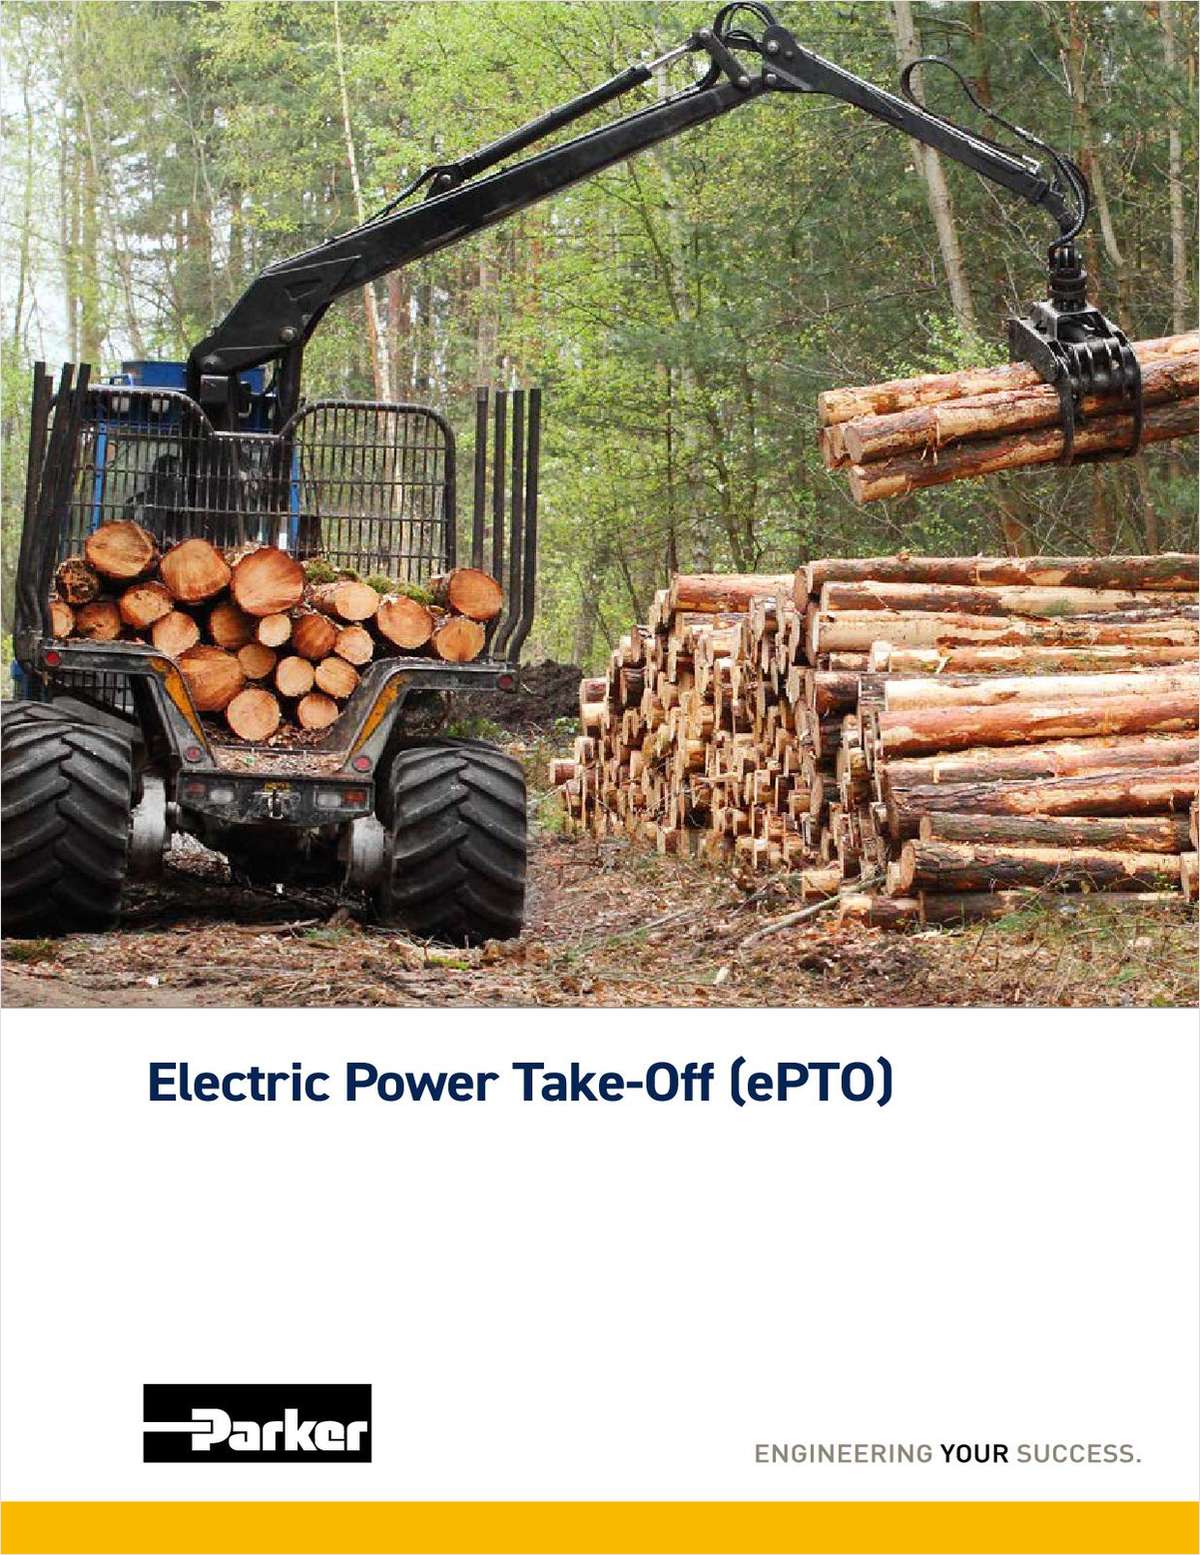 Adopting Electric Power Take-Off in the Forestry Sector